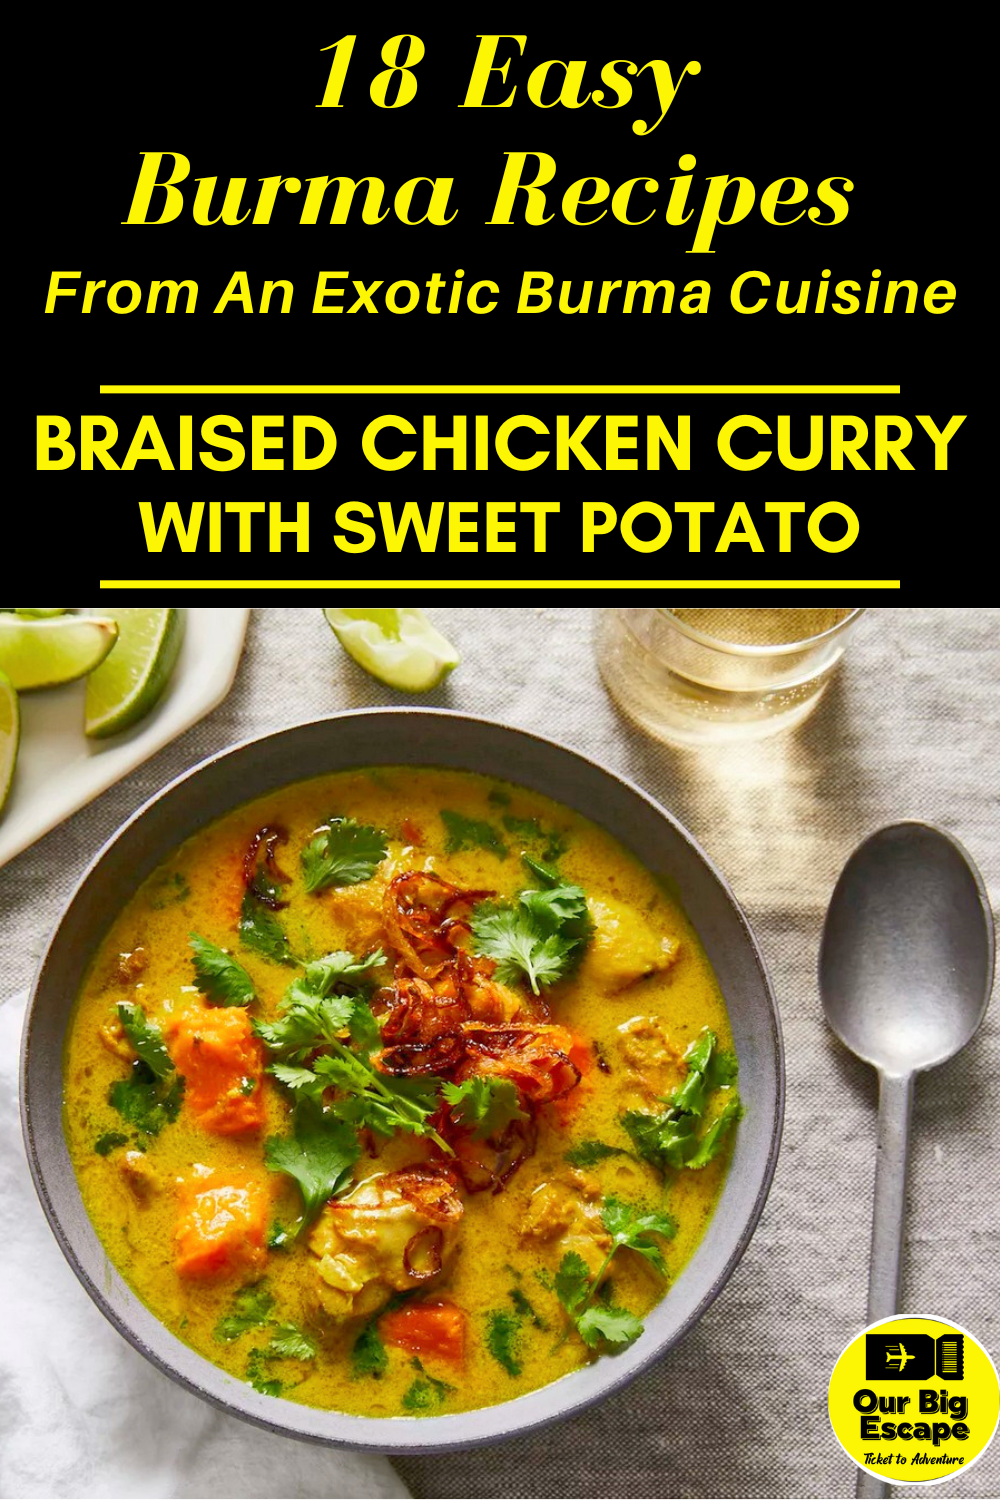 Braised Chicken Curry with Sweet Potato - 18 Easy Burma Recipes From An Exotic Burma Cuisine